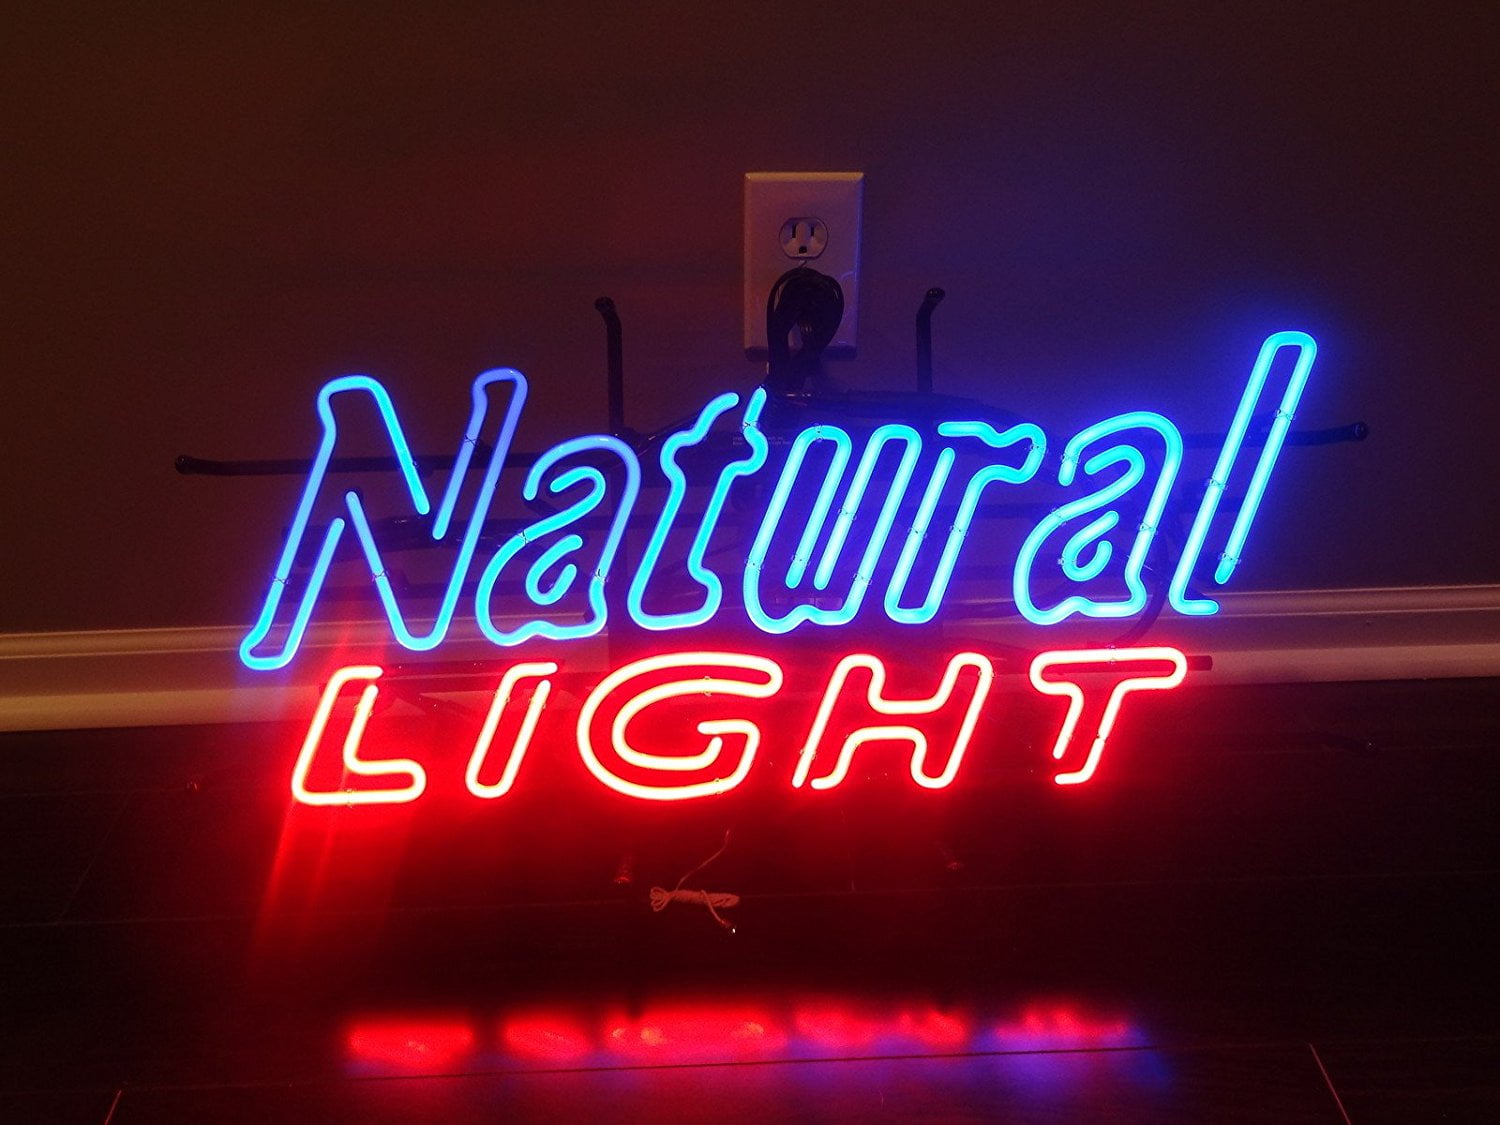 Double Cup Acrylic Neon Sign Beer Bar Decor Gift 14"x7" Light Lamp Bedroom 